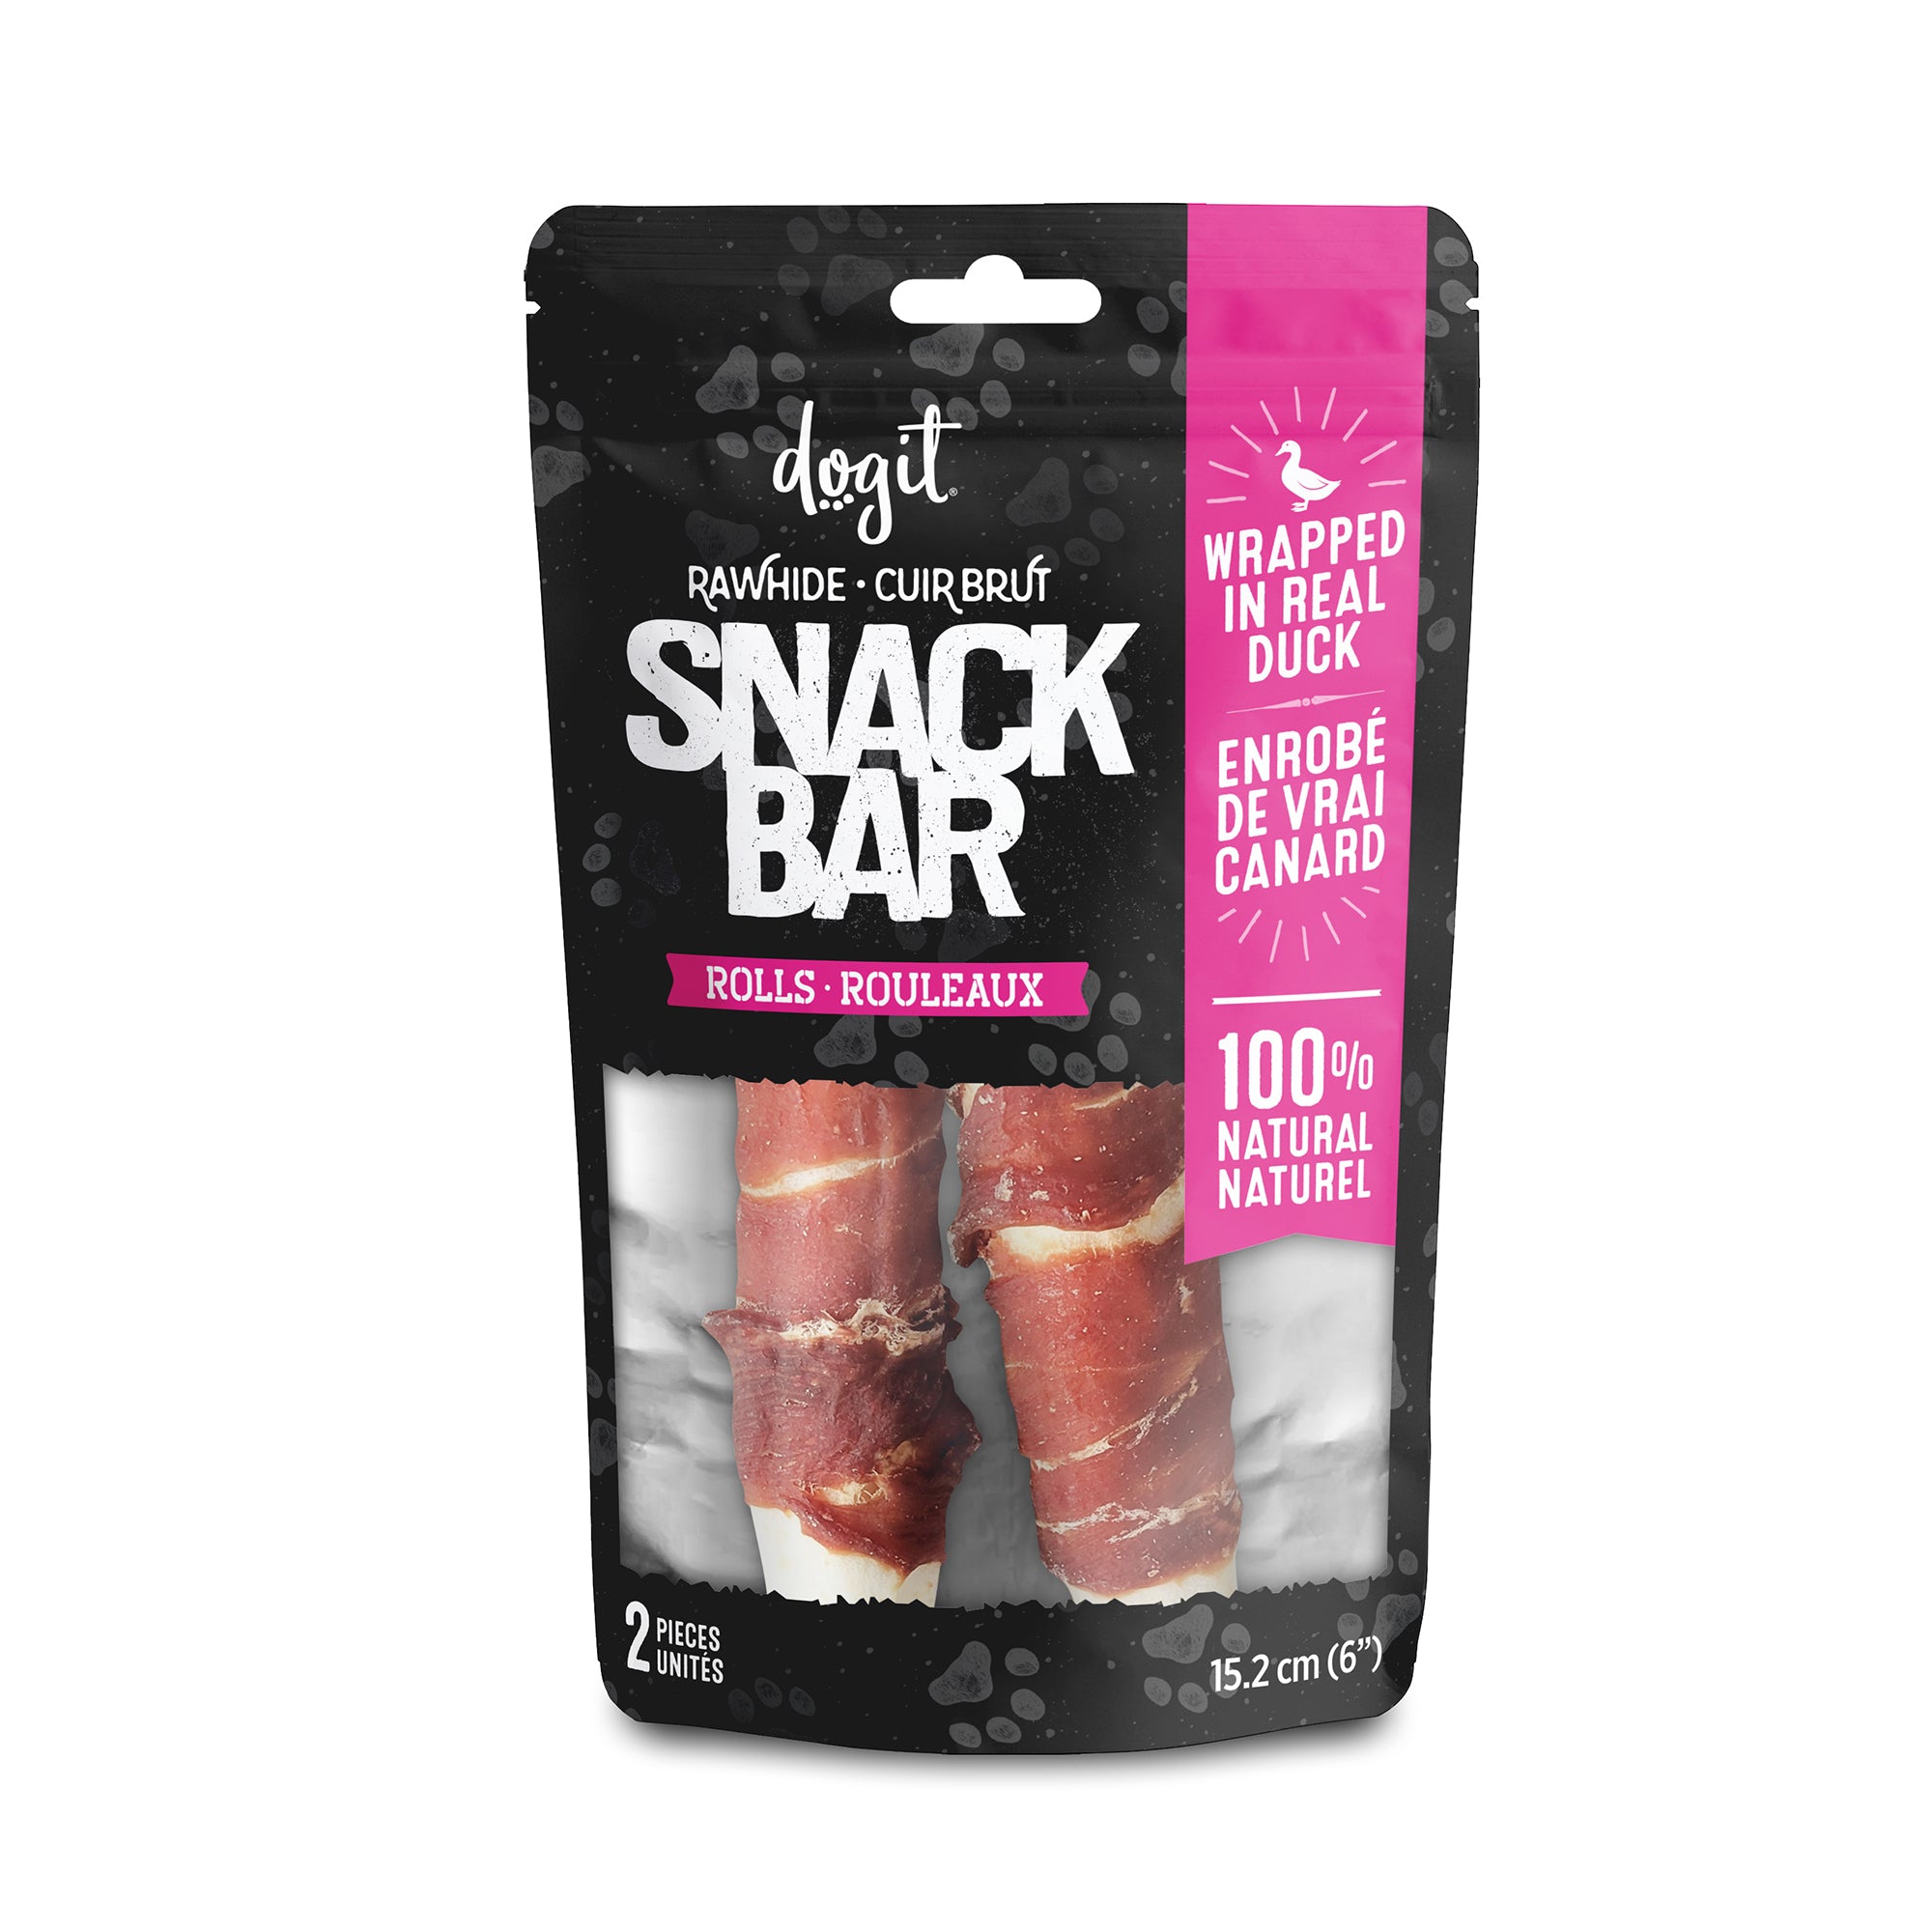 Dogit Snack Bar Rawhide - Duck-Wrapped Rolls - 2 pcs (15.2 cm/6 in)